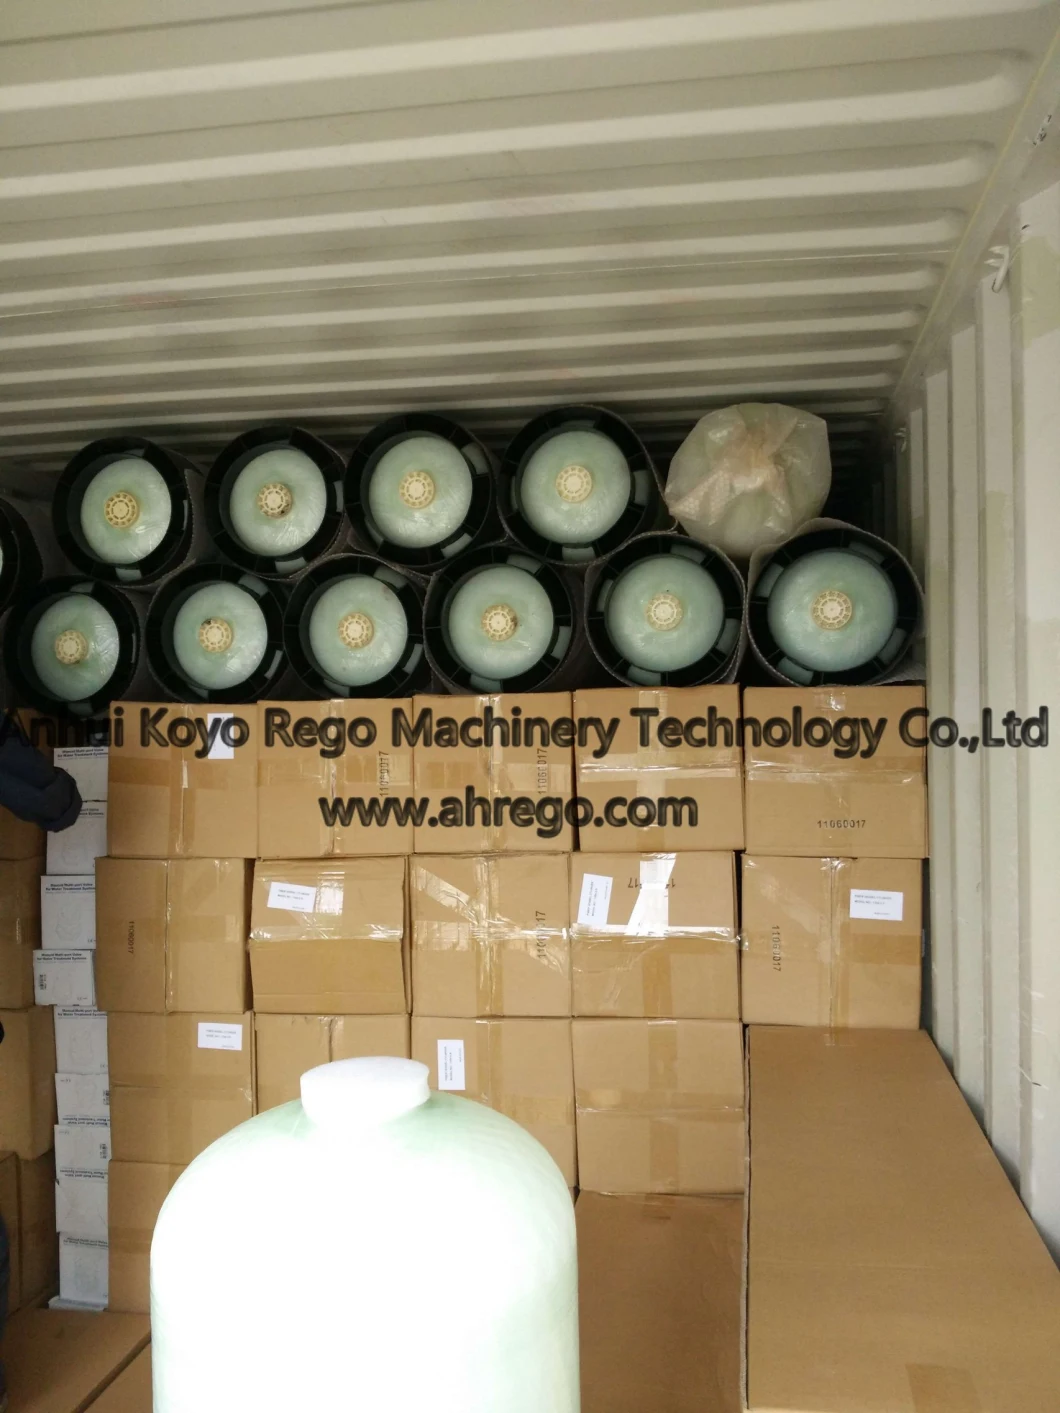 FRP Tanks Water Treatment System Softener Water Filter